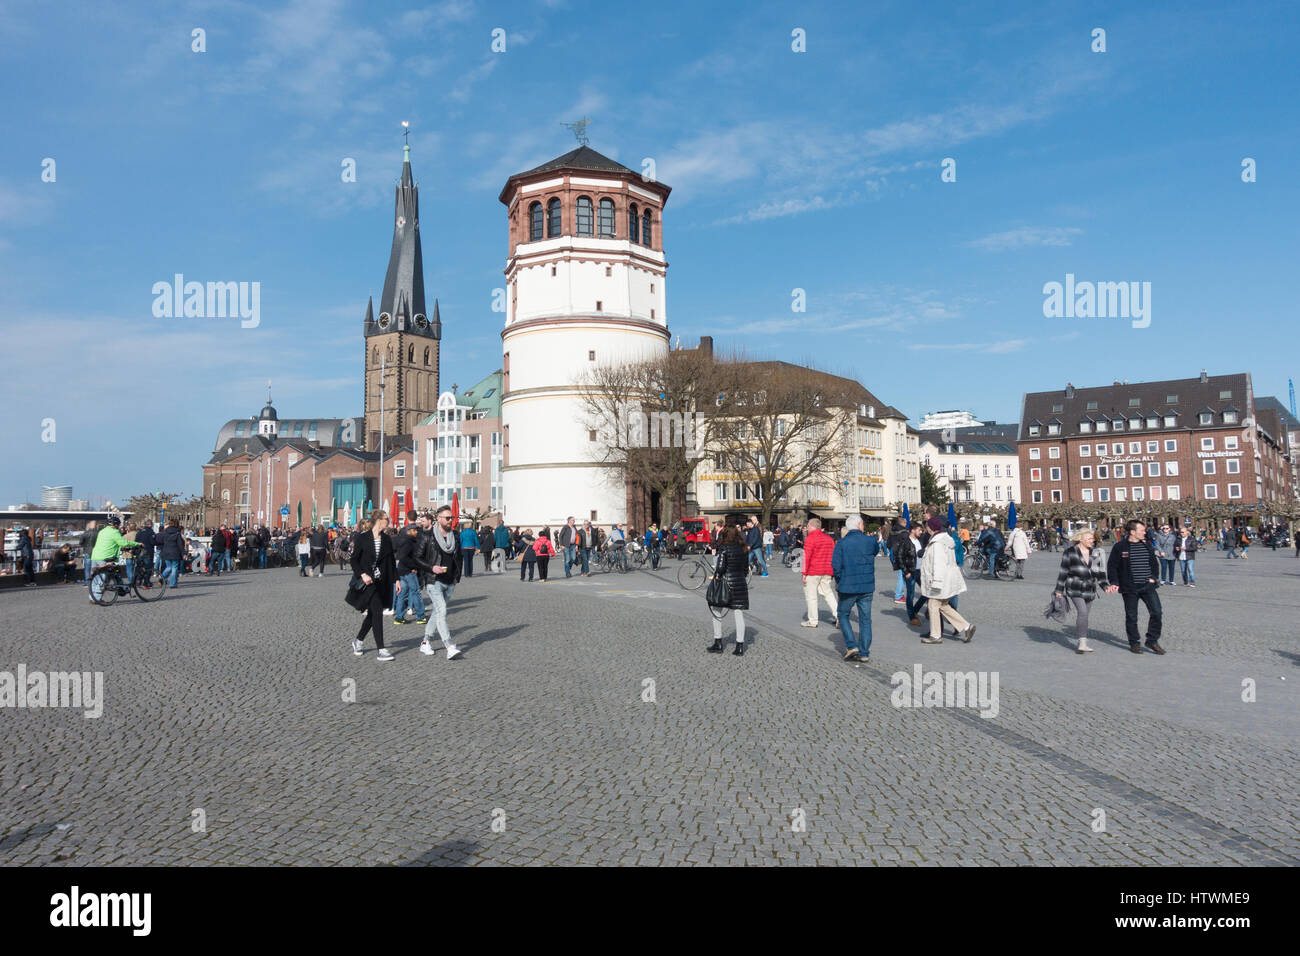 DUESSELDORF, GERMANY - MARCH 12, 2017: Unidentified pedestrants crossing a plaza at the river Rhine Stock Photo